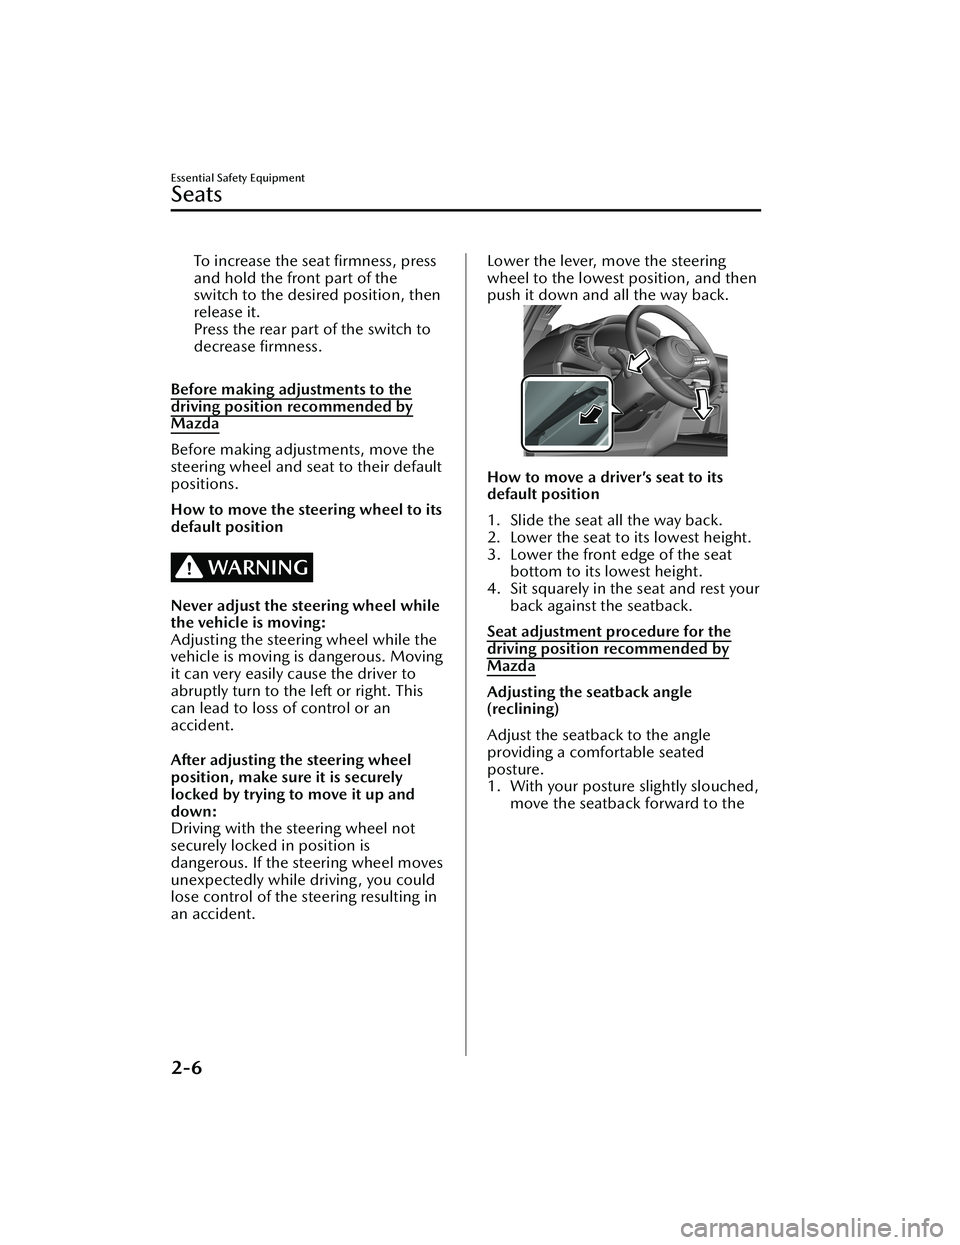 MAZDA MODEL CX-30 2020  Owners Manual To increase the seat ﬁrmness, press
and hold the front part of the
switch to the desired position, then
release it.
Press the rear part of the switch to
decrease ﬁrmness.
 
Before making adjustmen